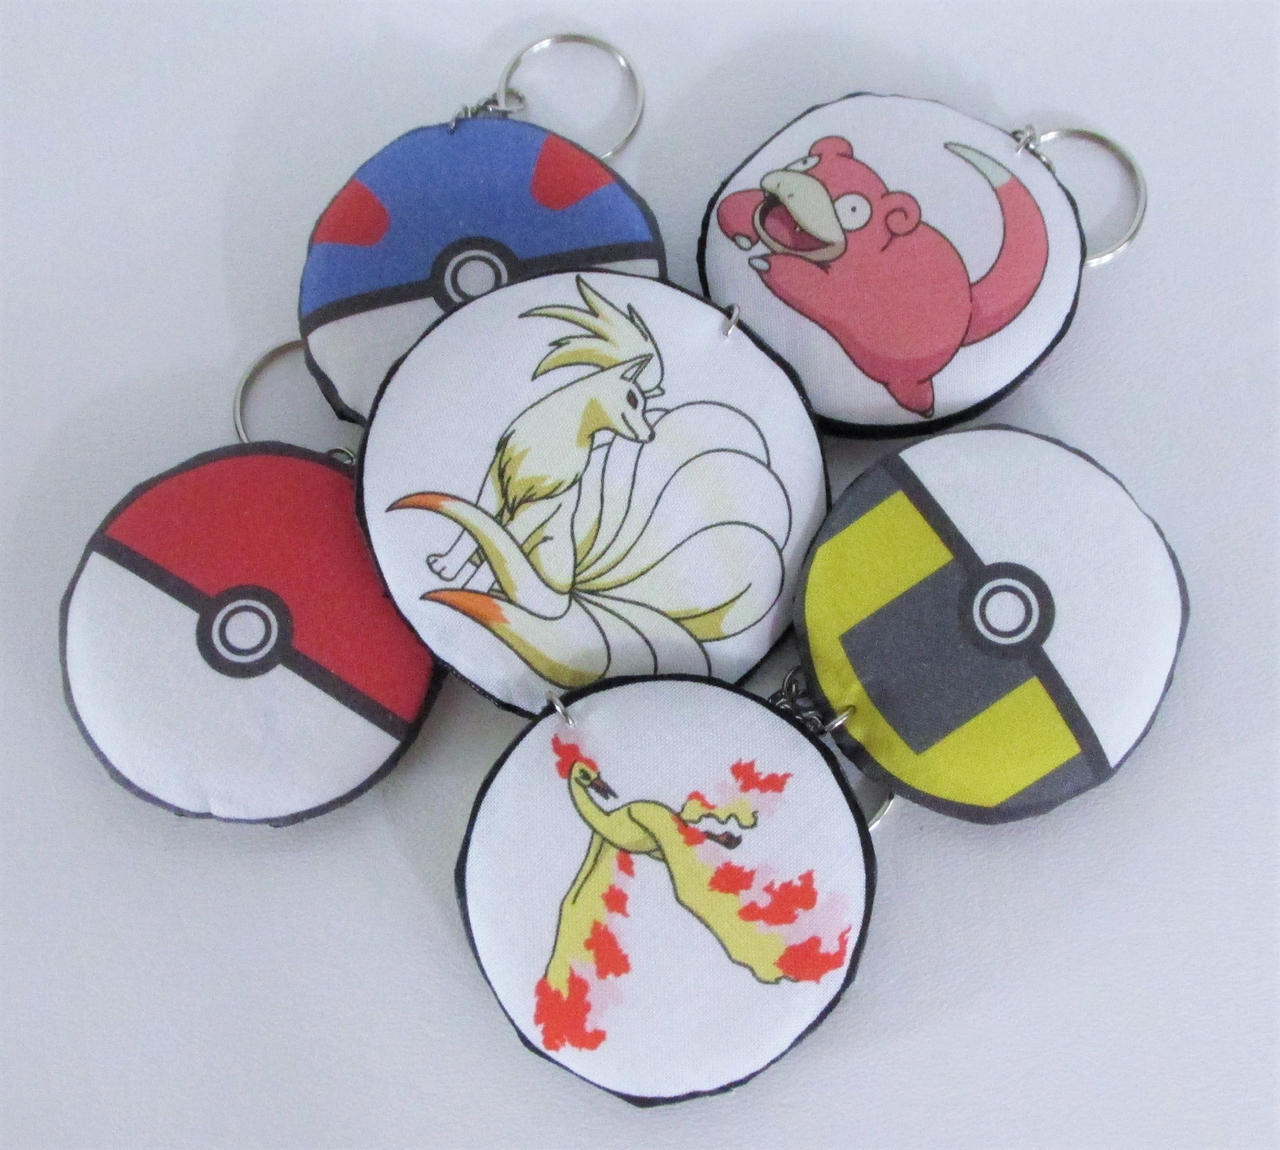 Voltorb / Electrode Pokemon Charm Made Into What You Want 